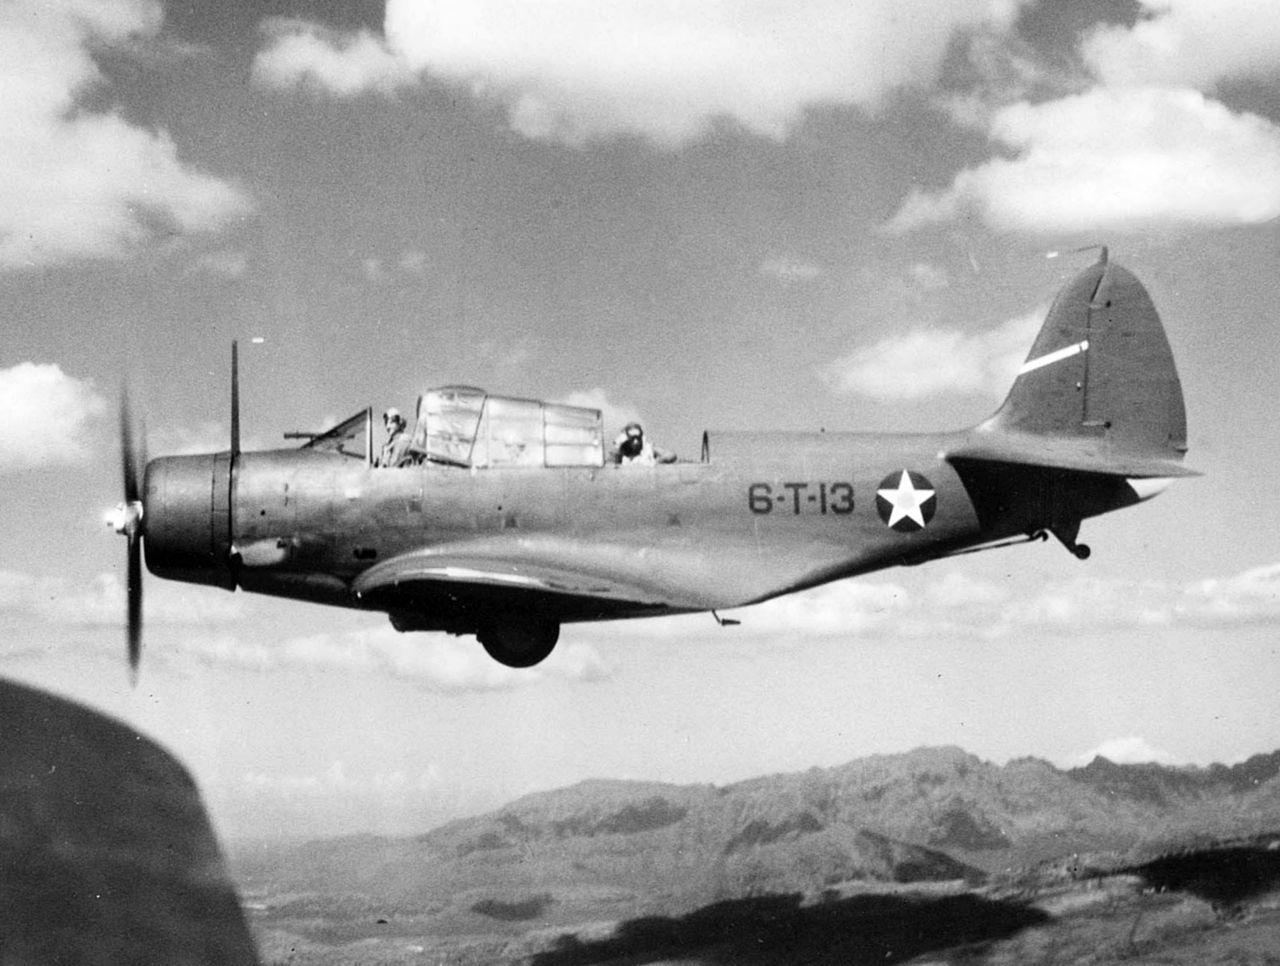 Douglas TBD-1 of the VT-6 over Hawaii, 1942